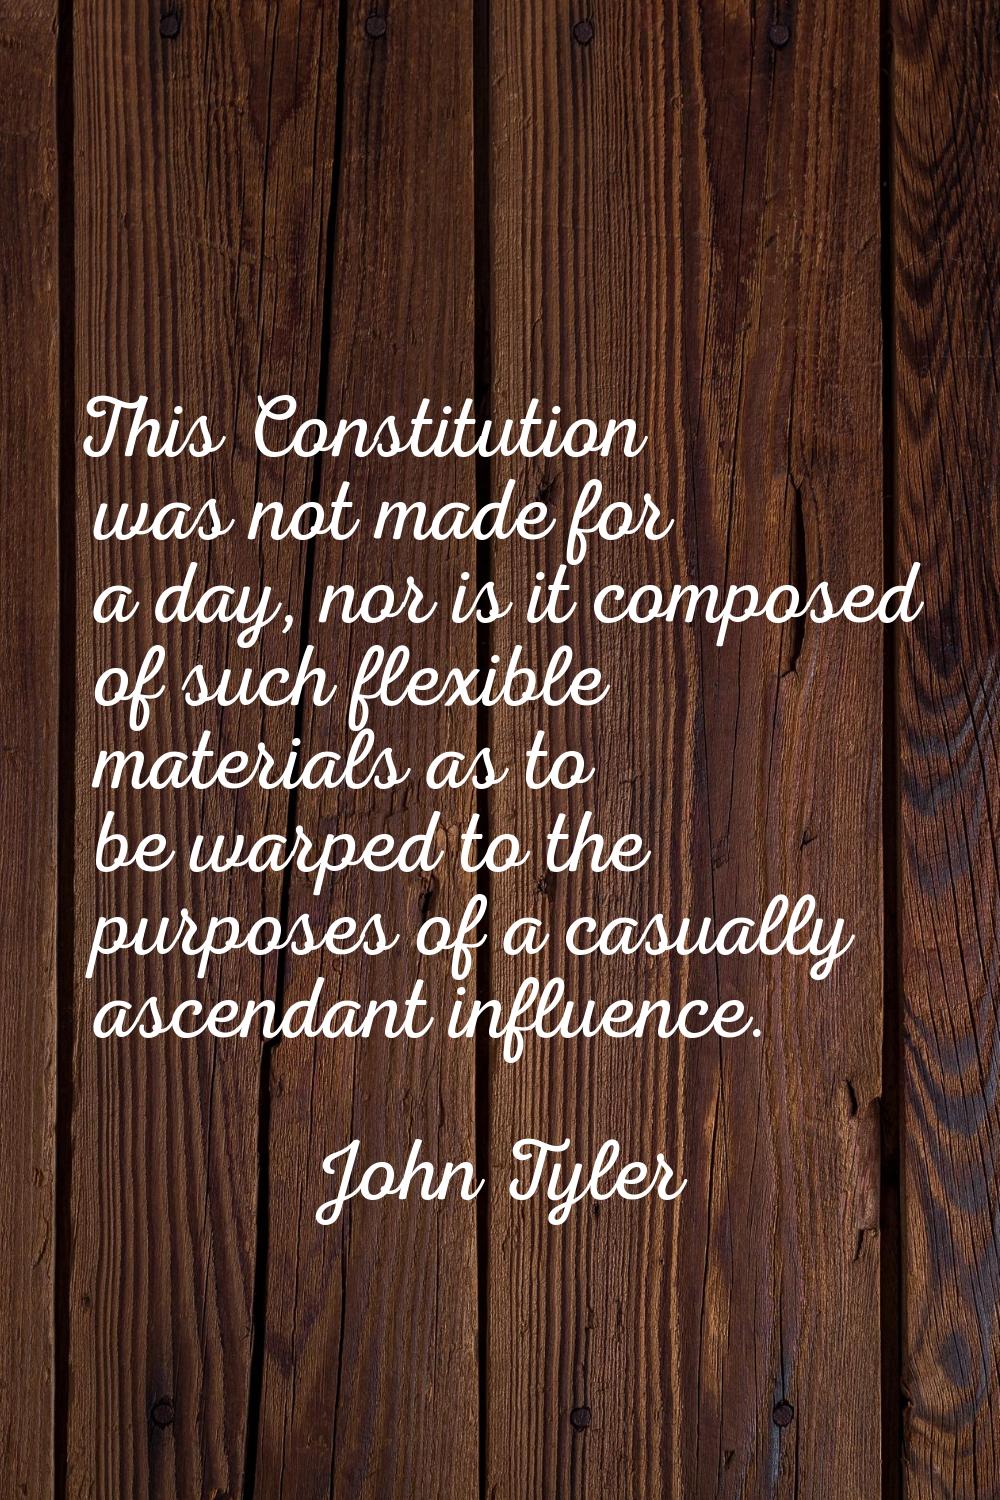 This Constitution was not made for a day, nor is it composed of such flexible materials as to be wa